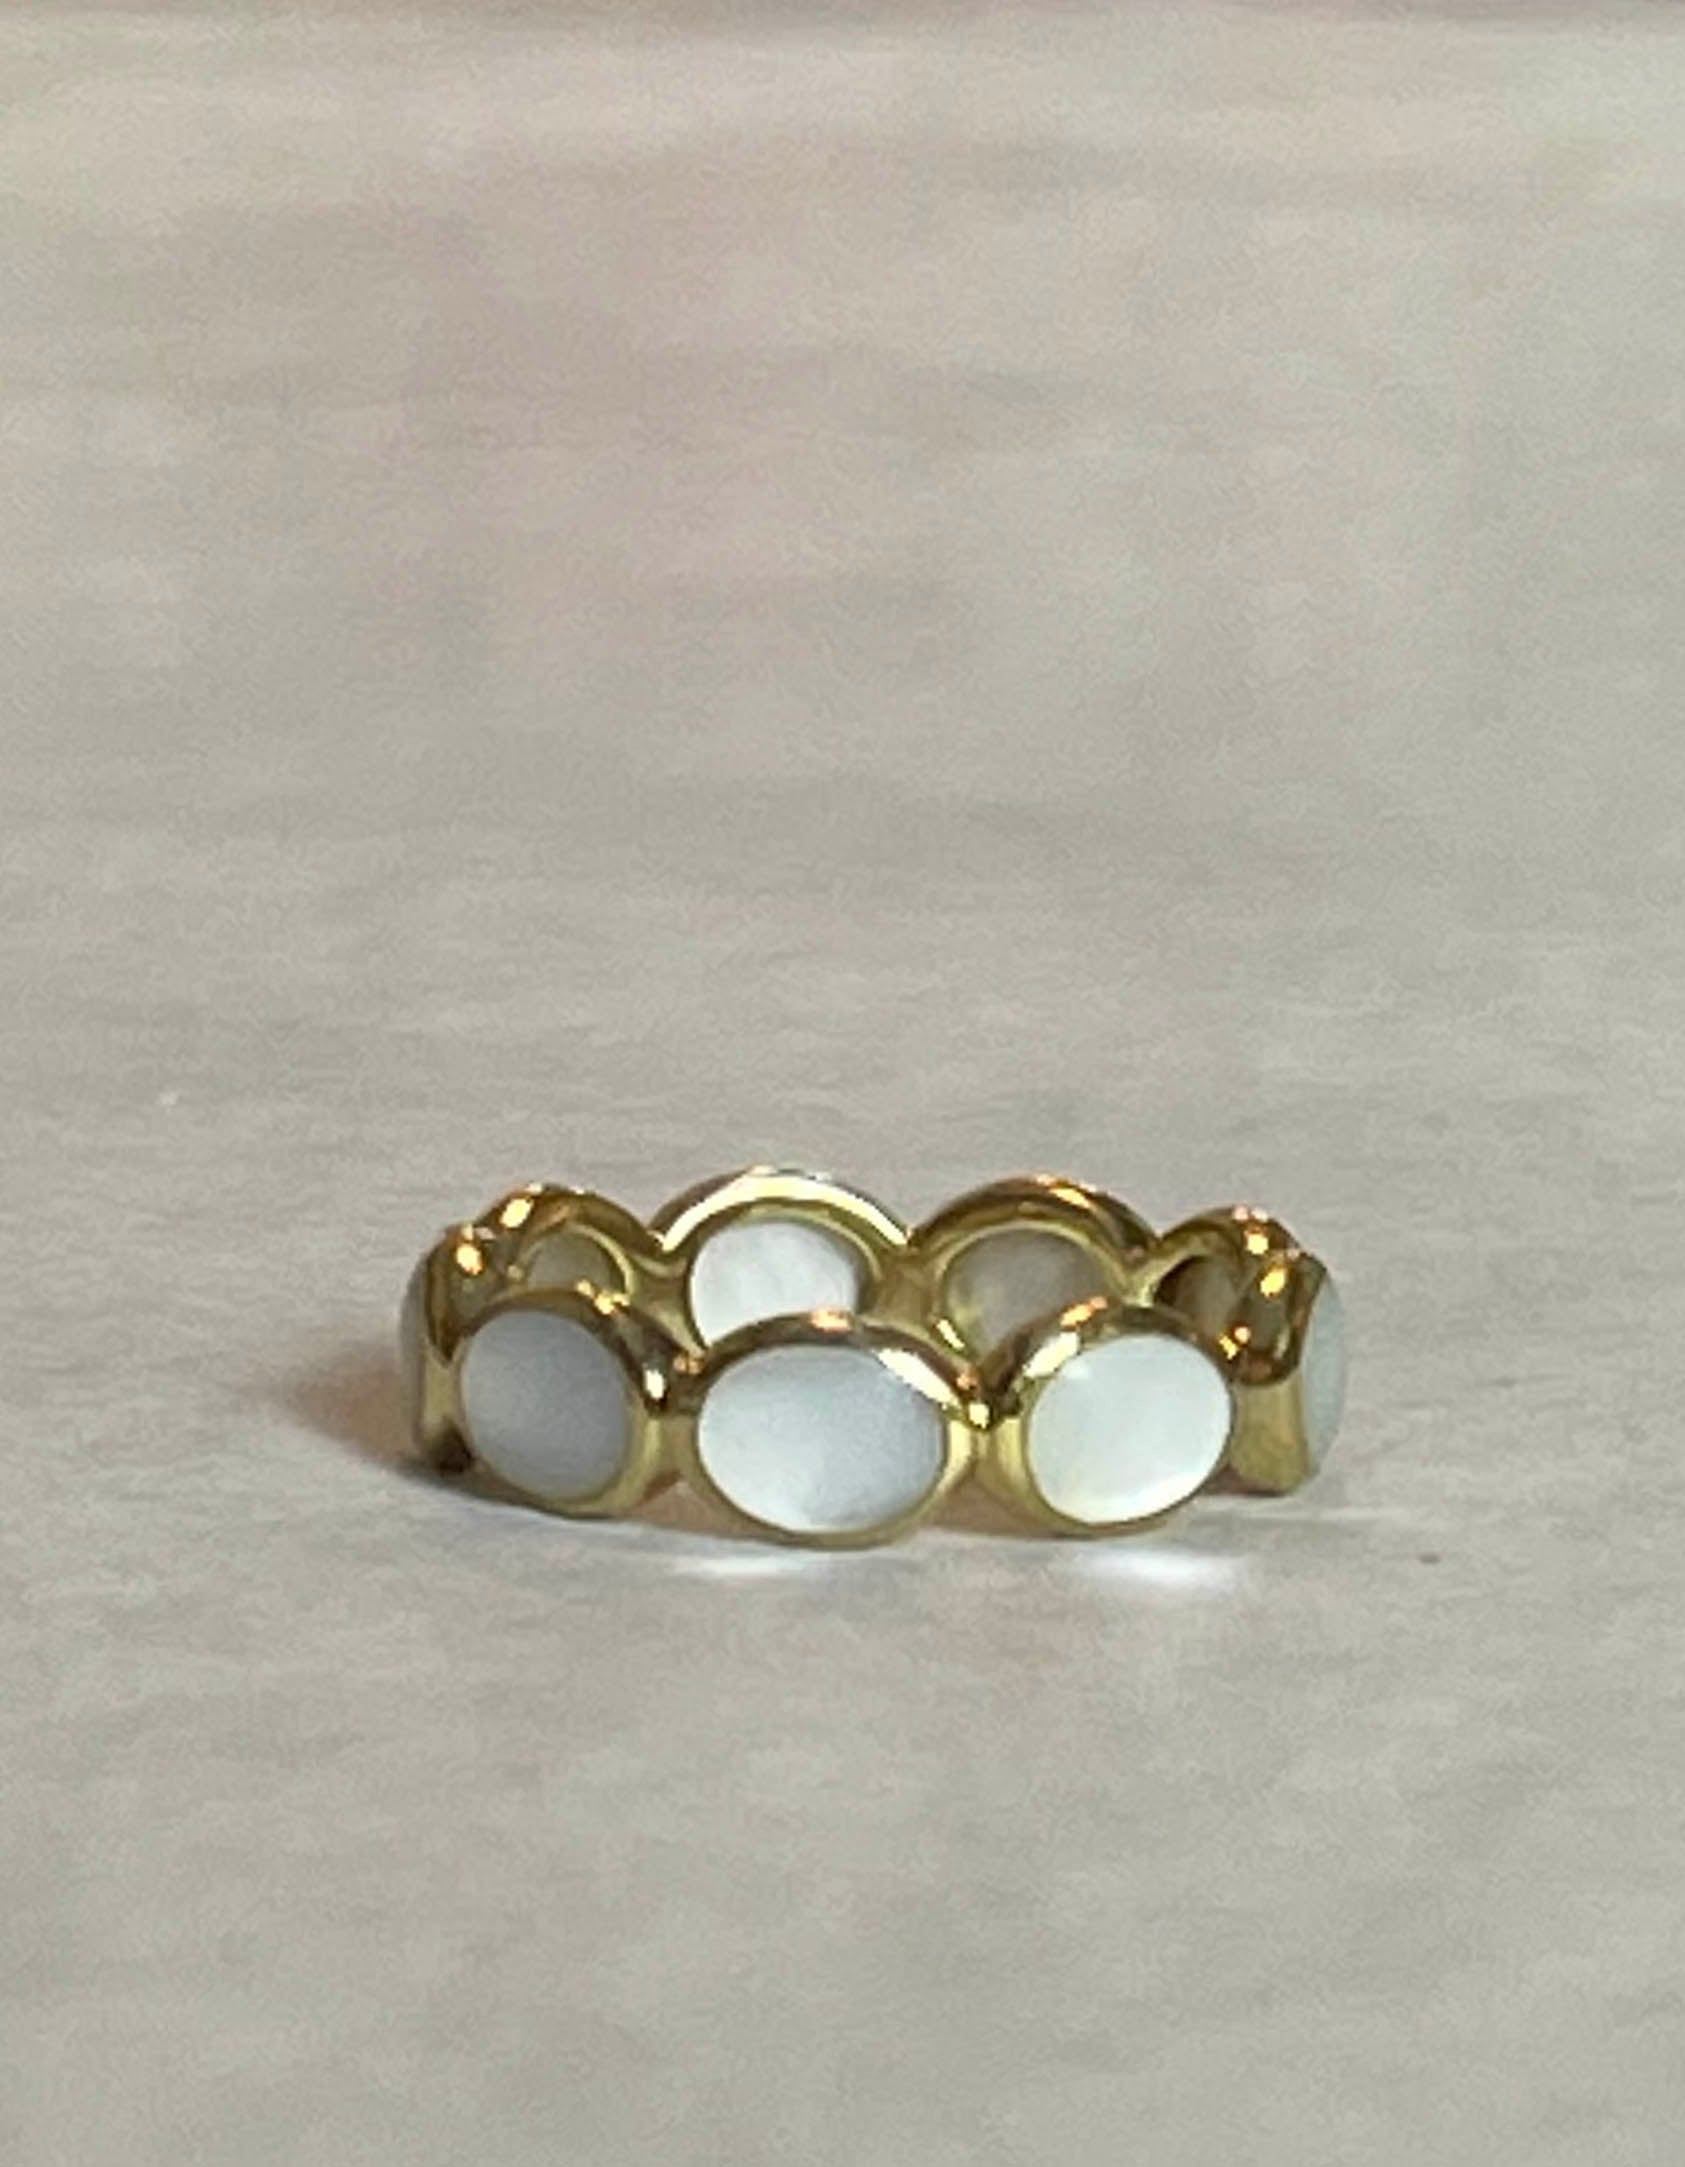 Ippolita 18k Yellow Gold & Mother of Pearl Rock Candy Eternity Band Ring sz 5.5